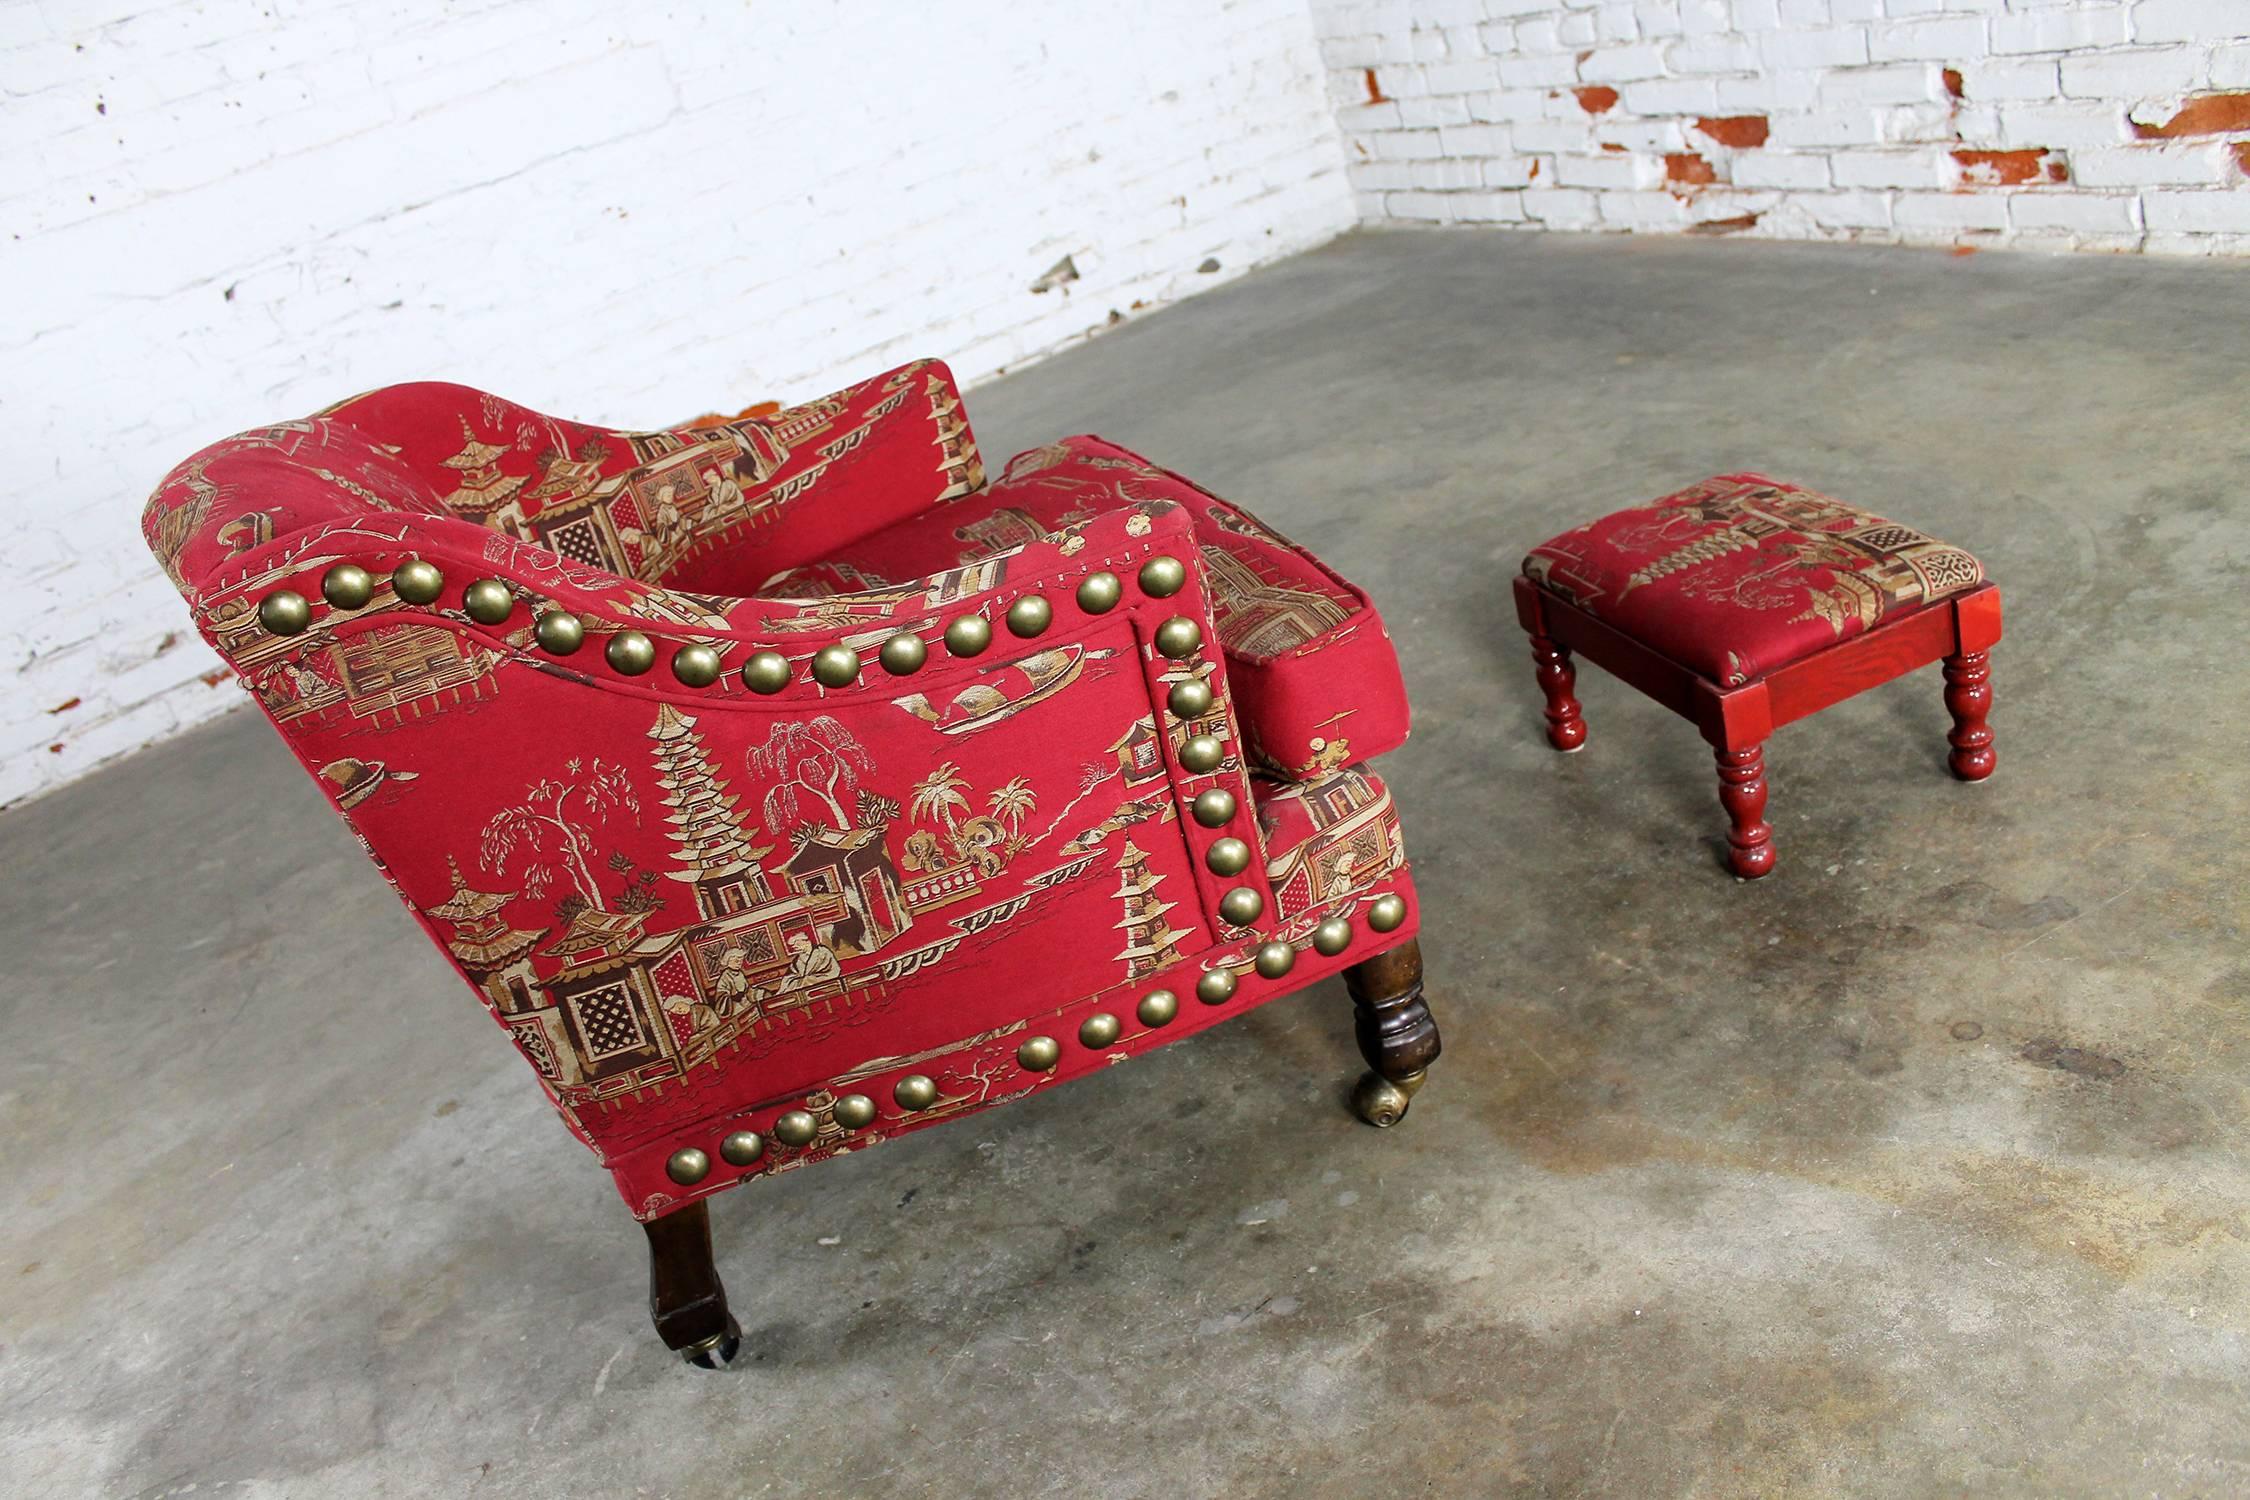 Awesome petite upholstered armchair with matching cricket style footstool. Done in a red Chinoiserie woven fabric with extra-large antique brass nailhead detail in fabulous vintage condition.

This is the most wonderful little armchair and